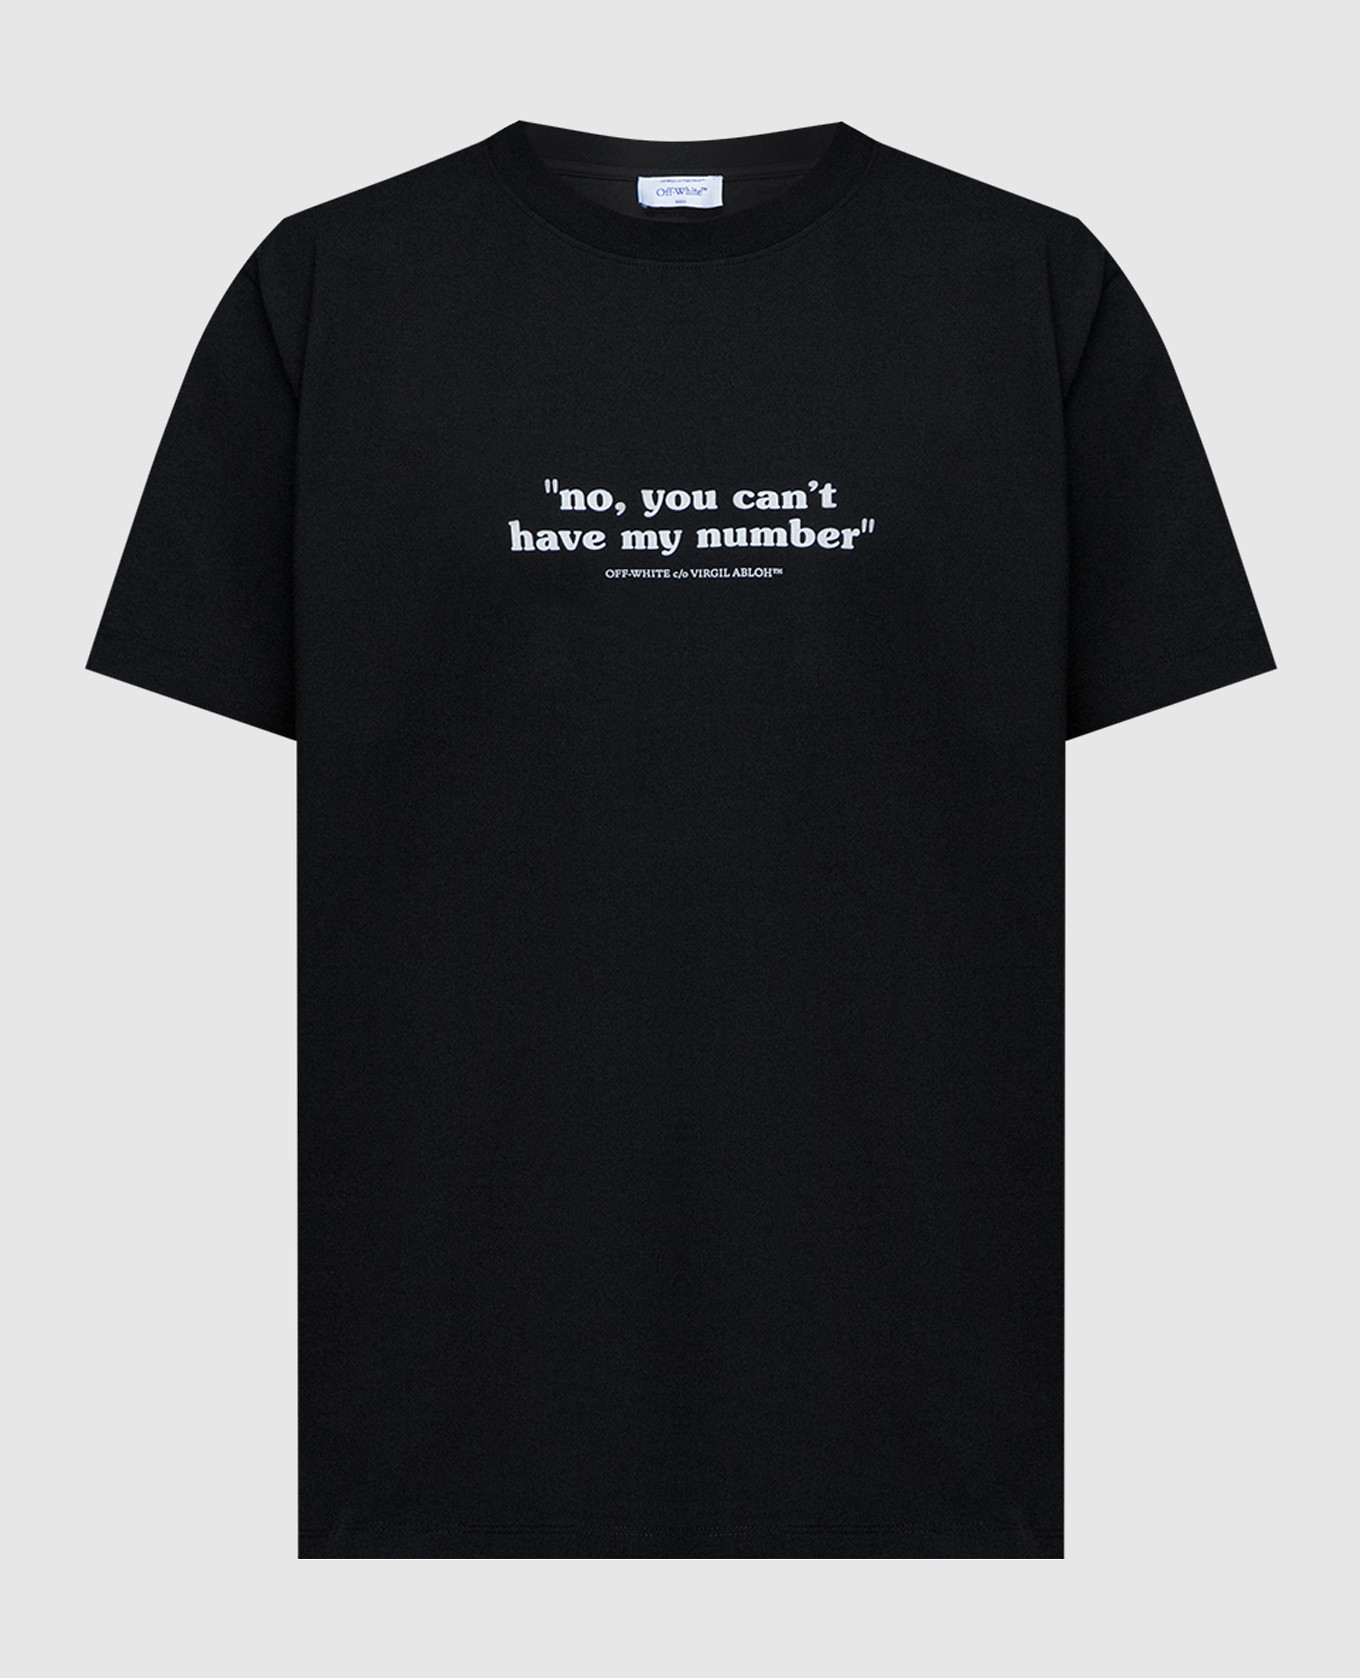 Black t-shirt with a quote print